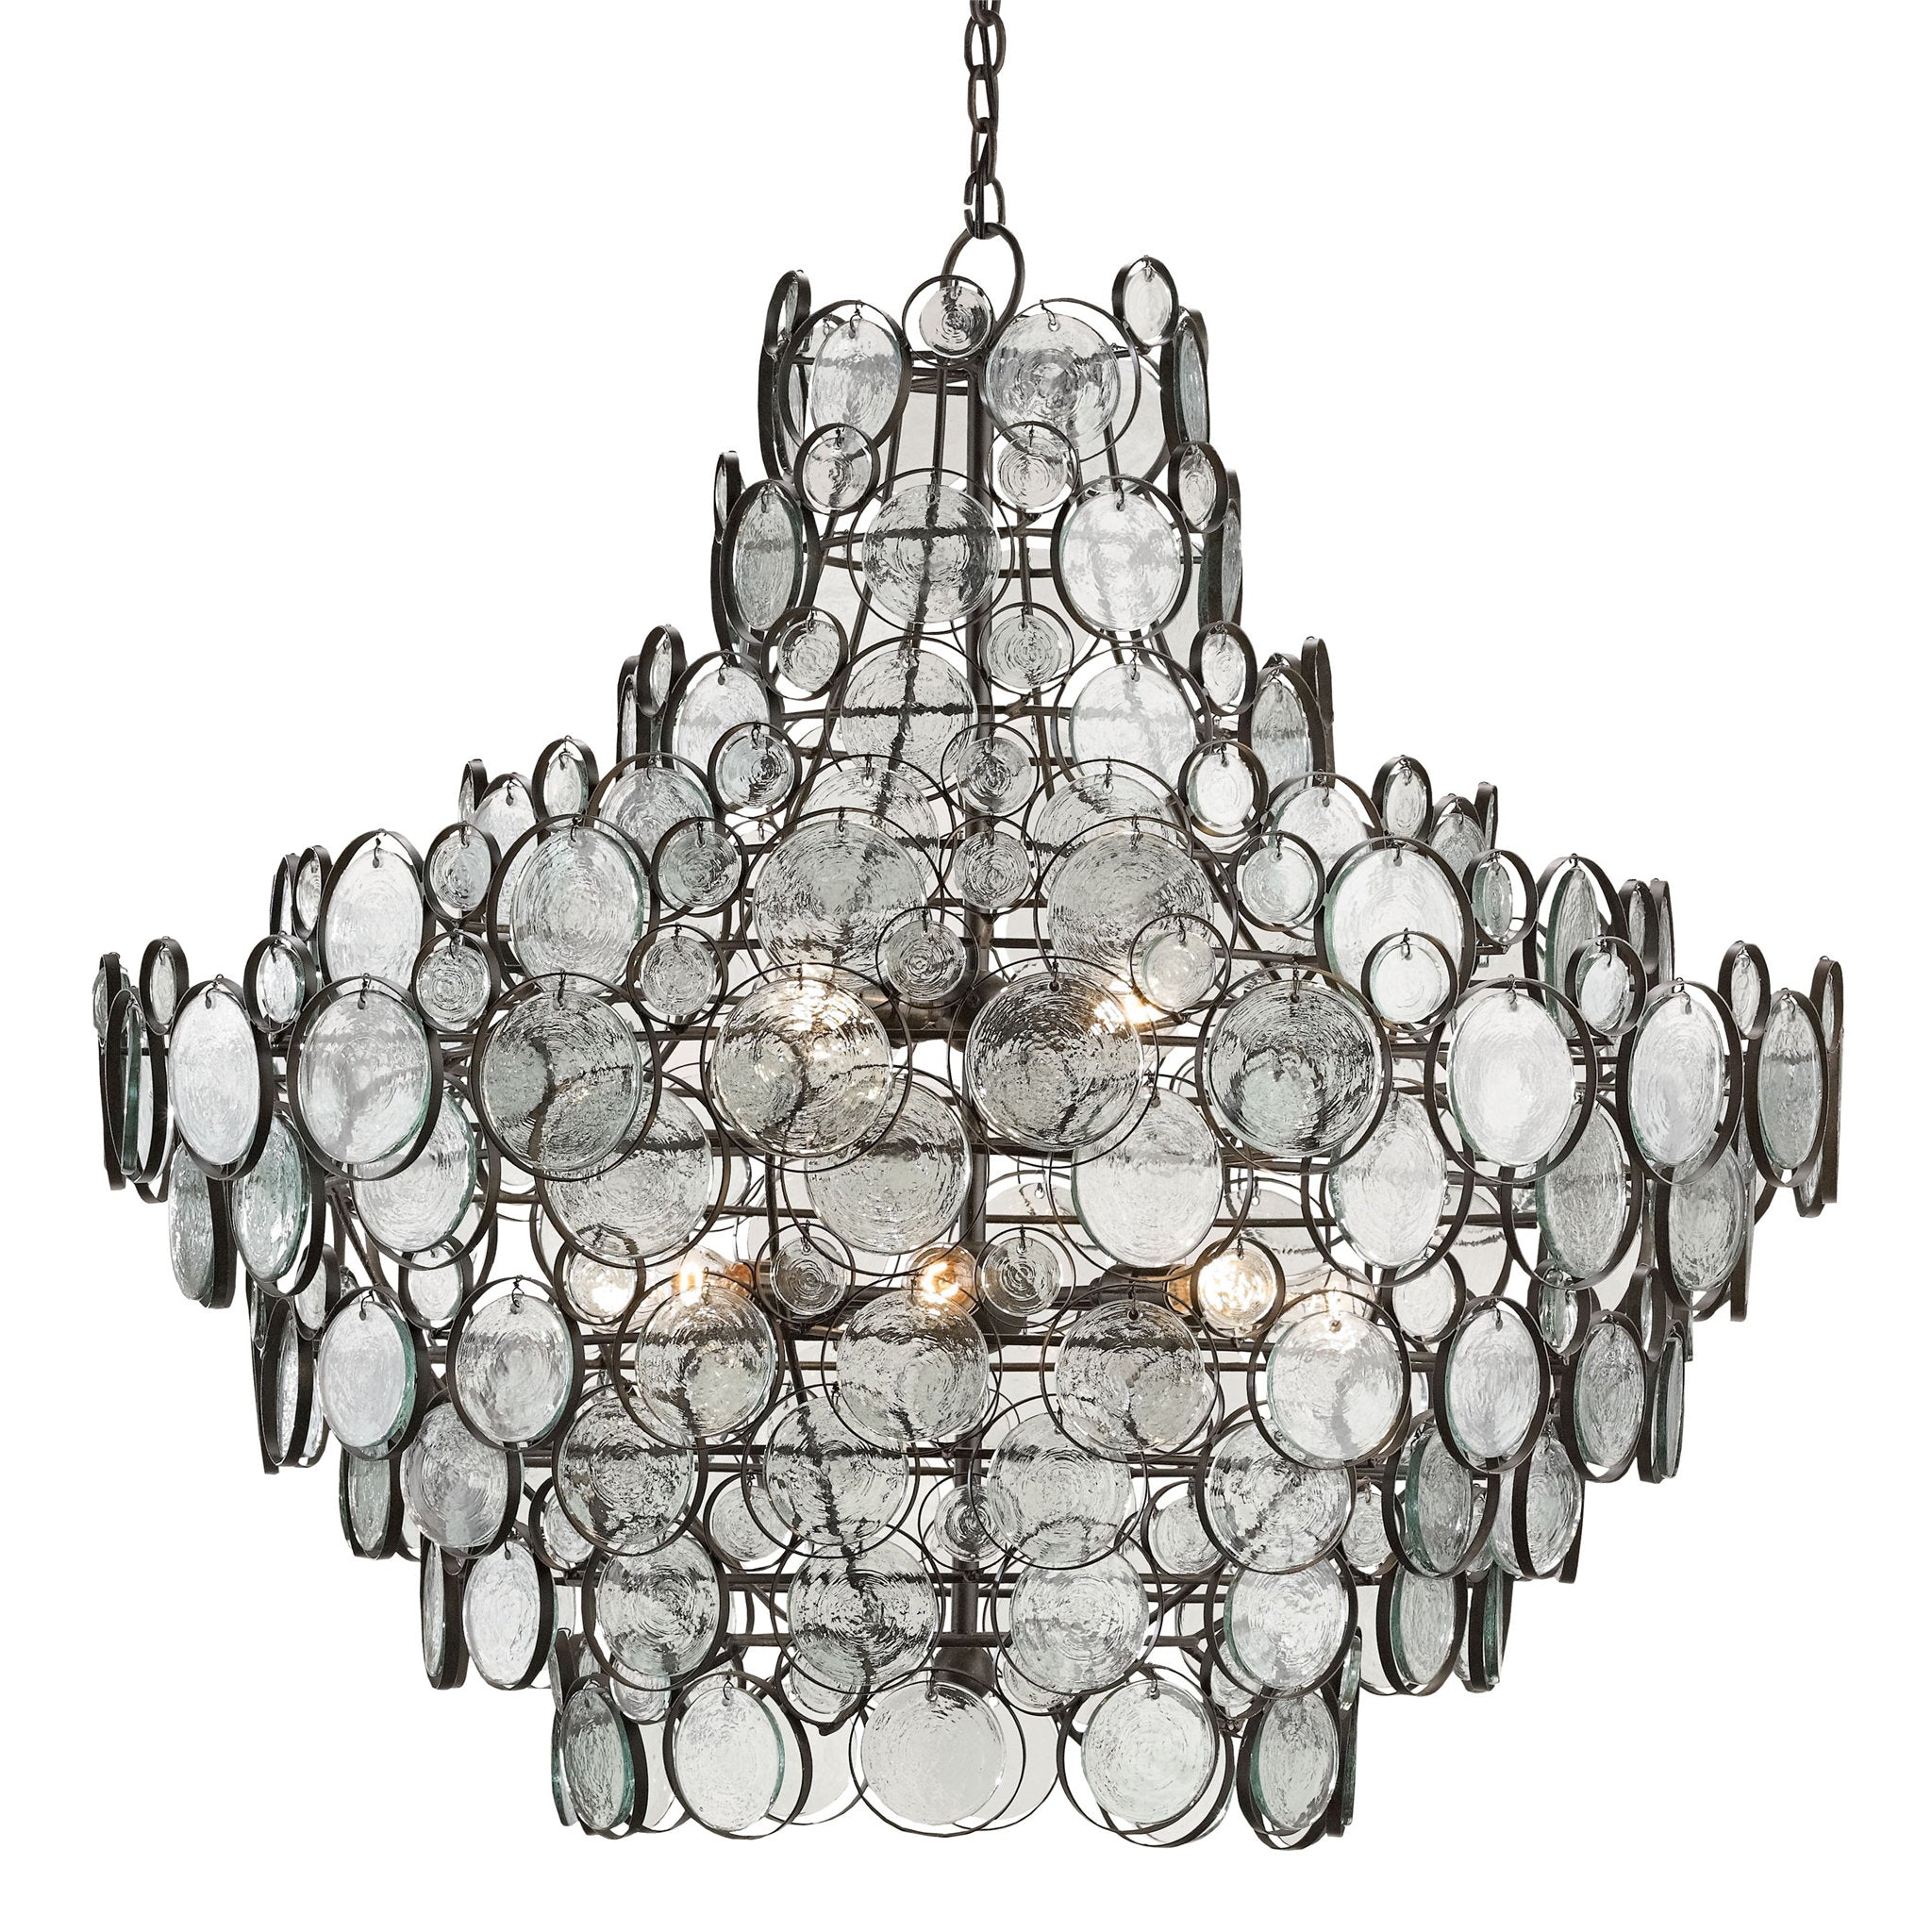 Galahad Large Recycled Glass Chandelier - Bronze